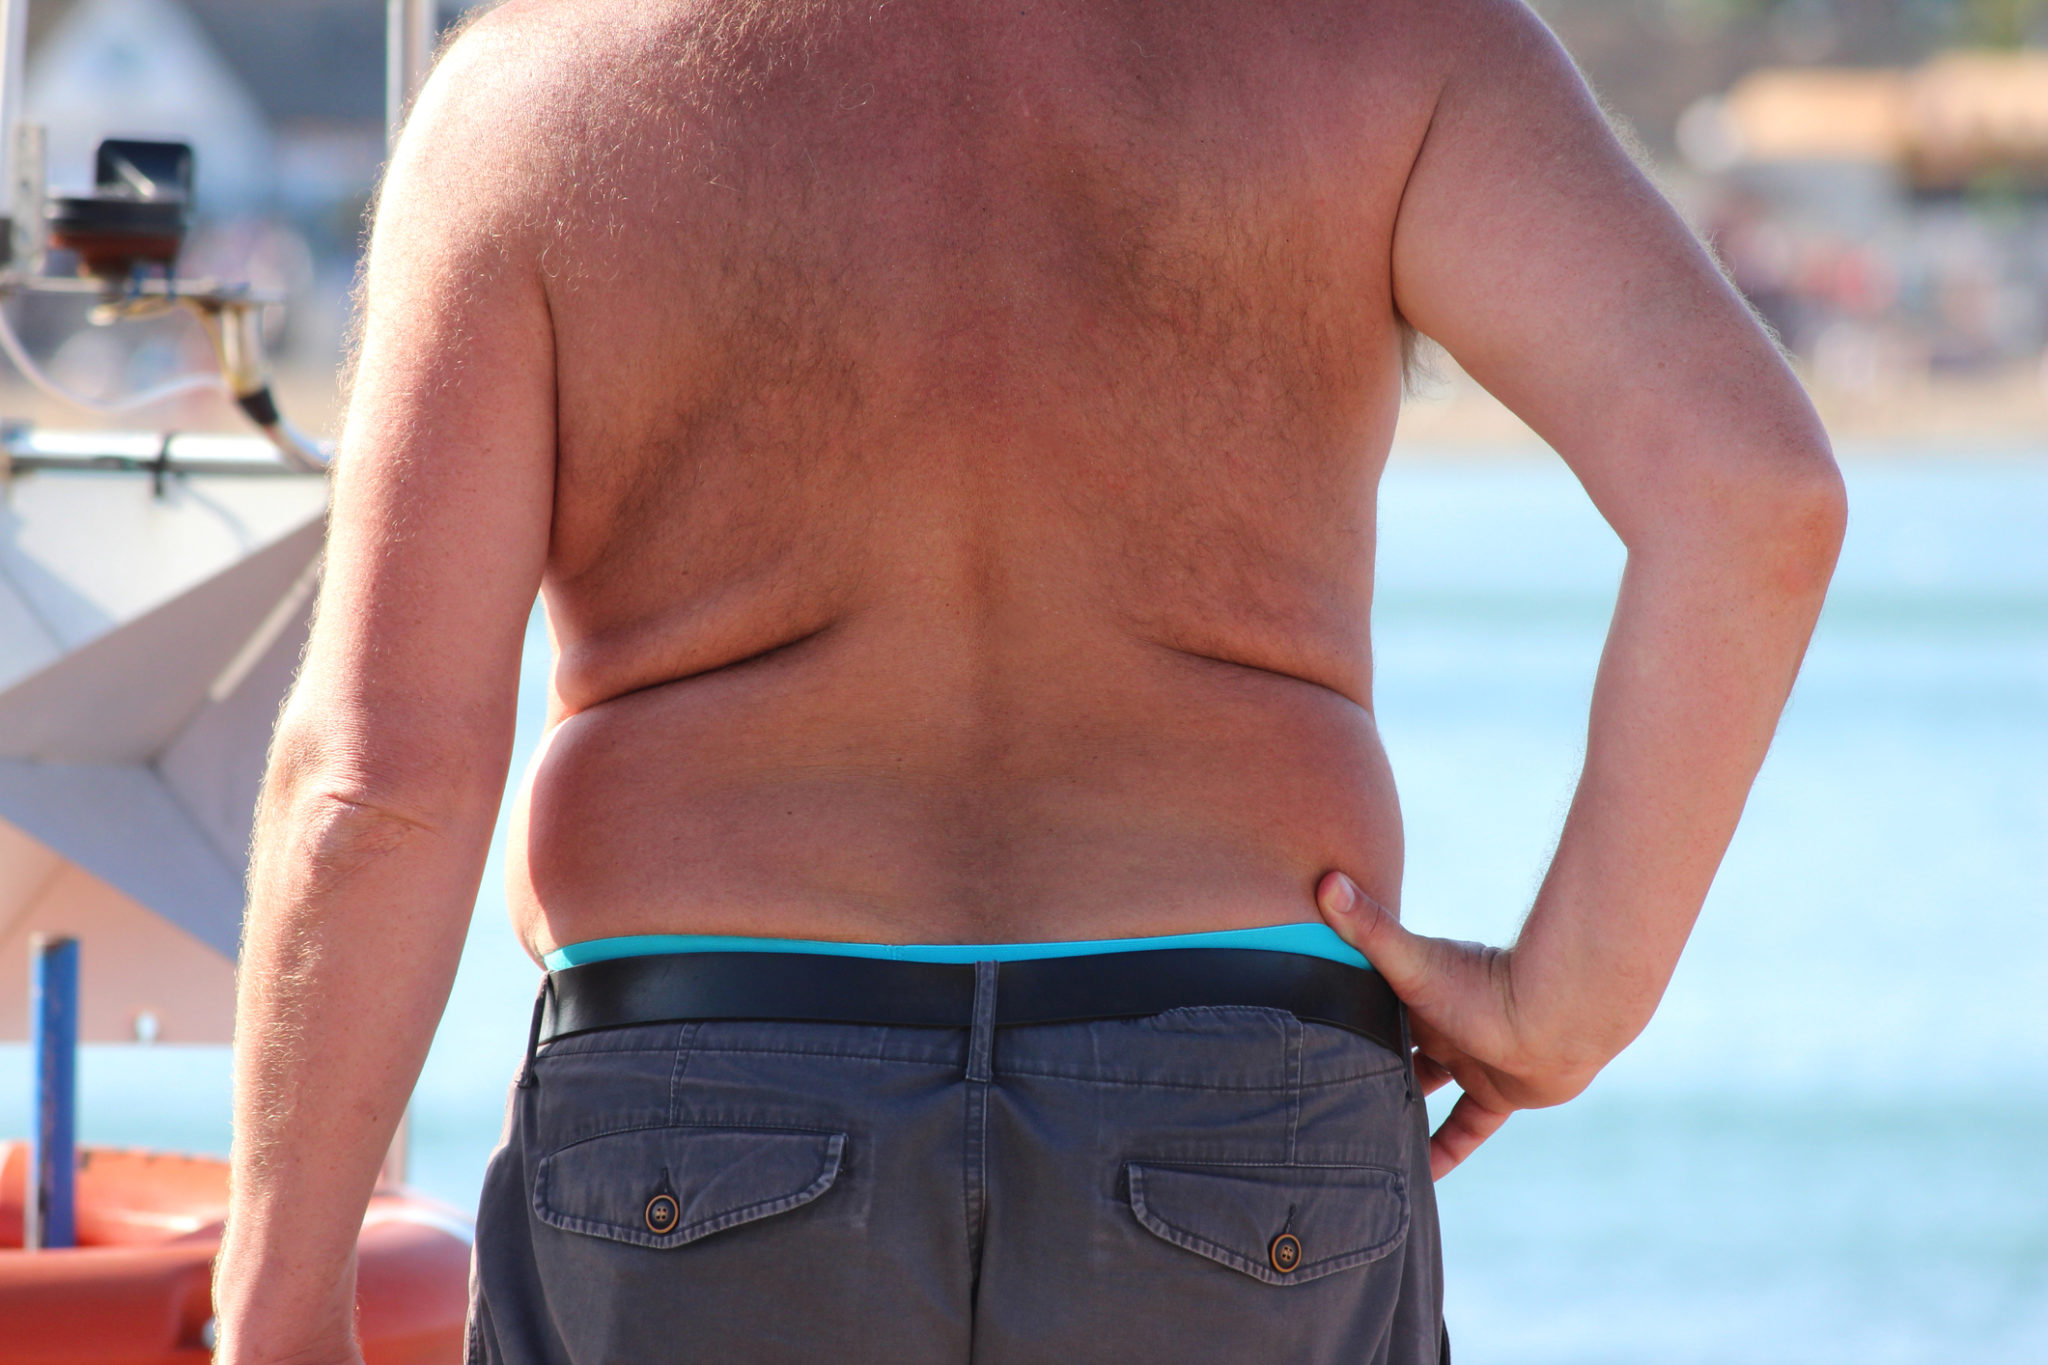 body dysmorphic syndrome - obese mand from behind